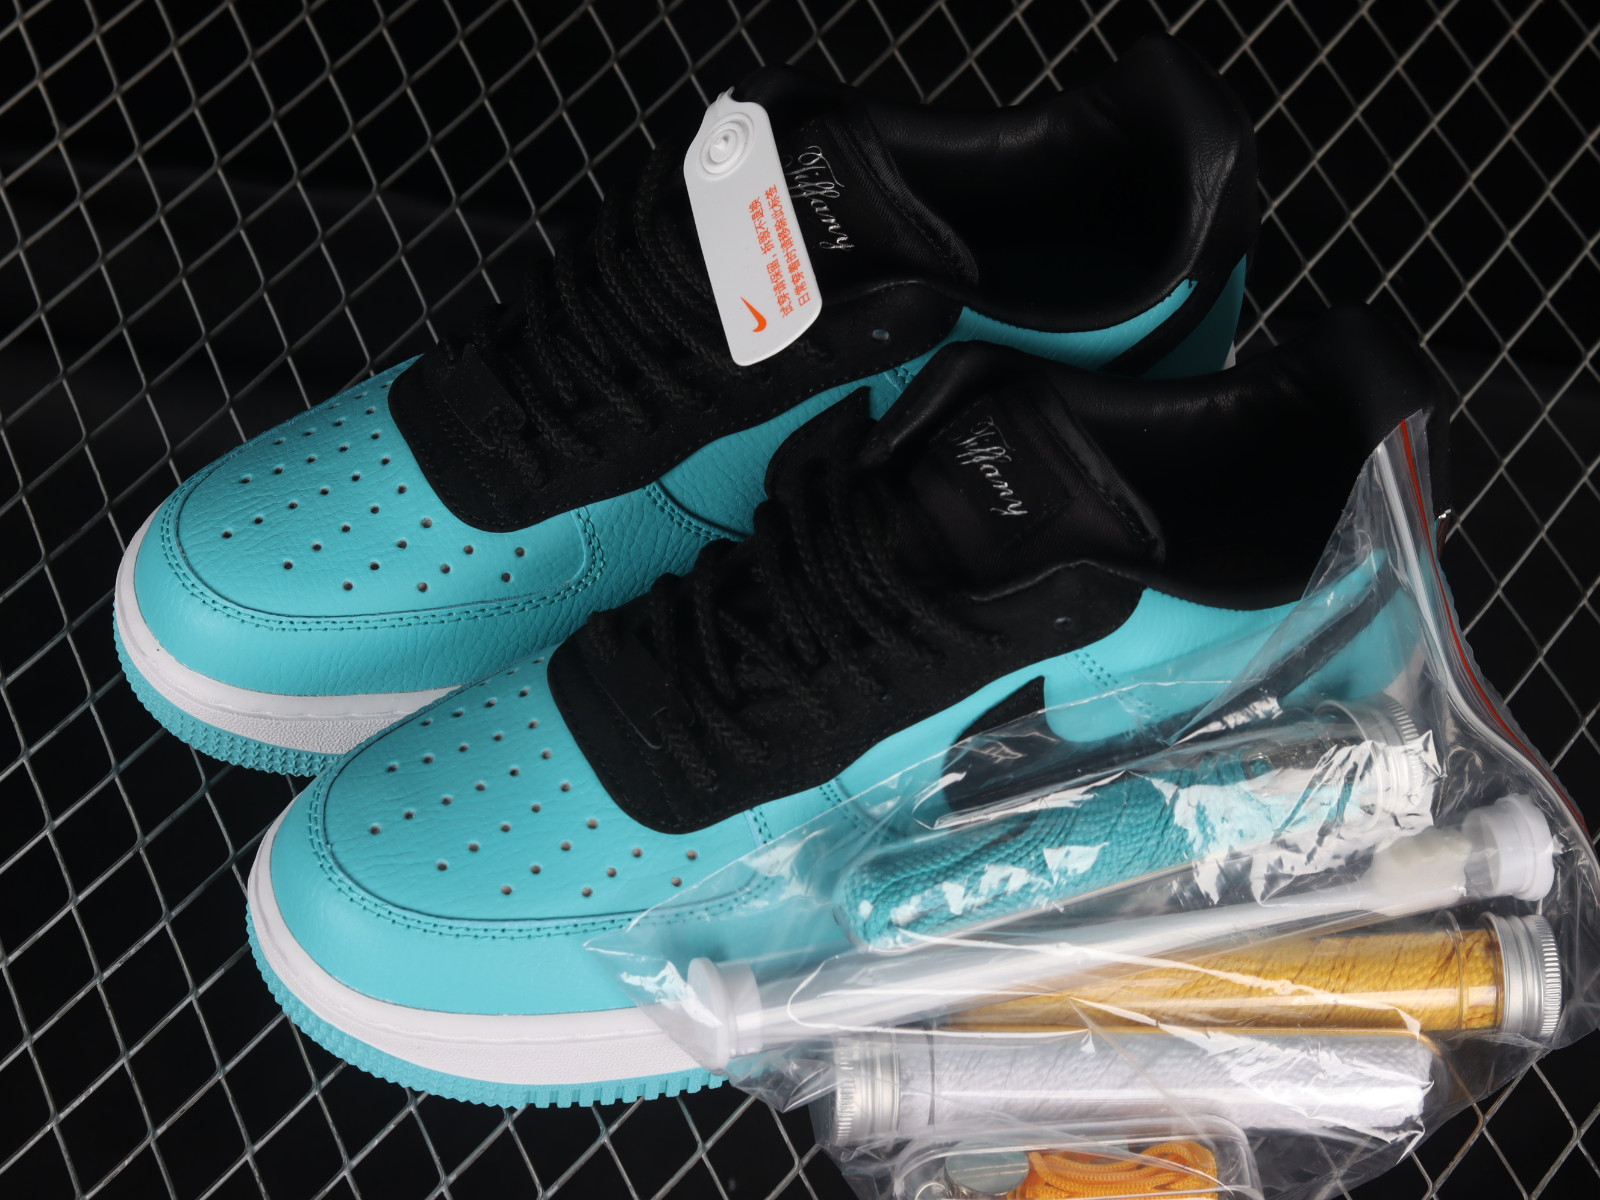 Where to Buy the Tiffany & Co. x Nike Air Force 1 '1837' - Sneaker